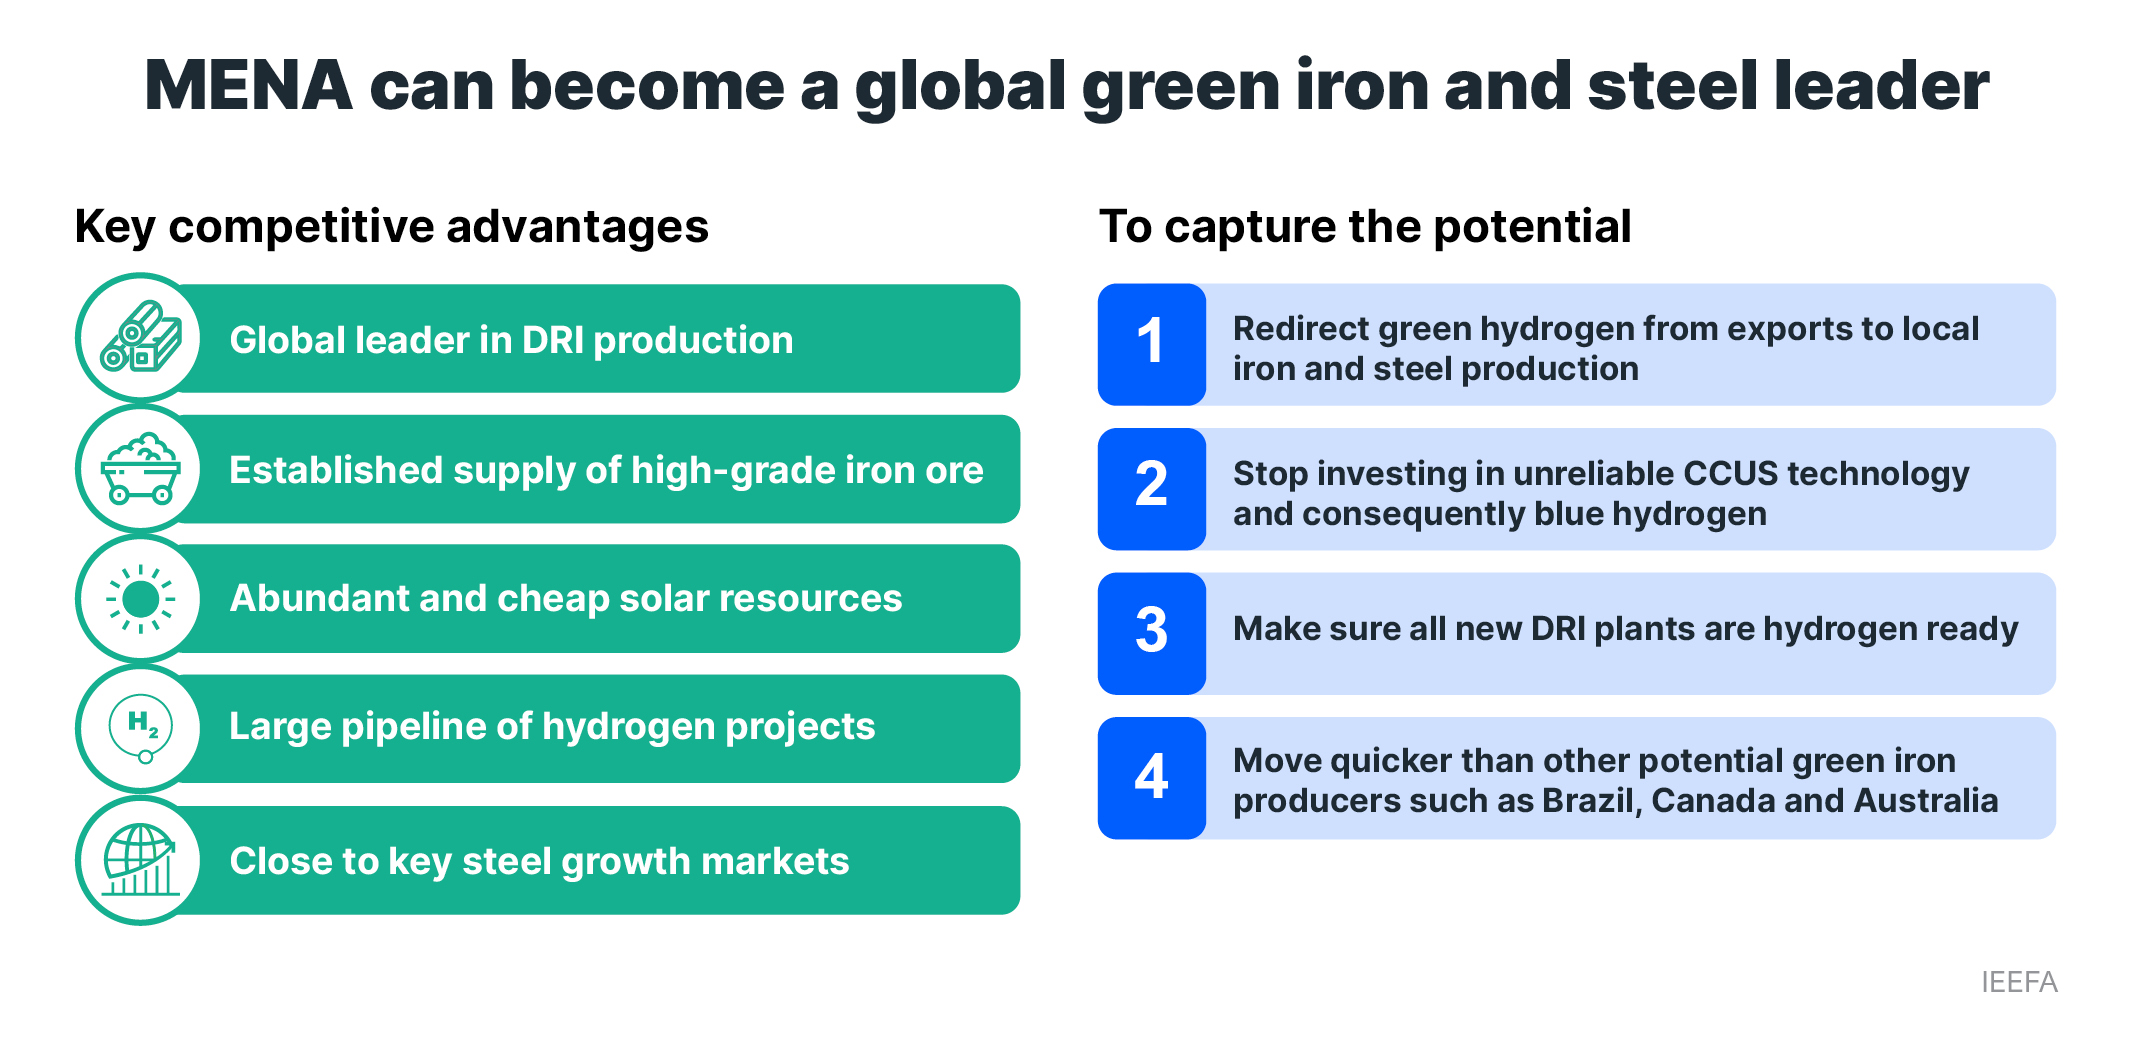 MENA can become a global green iron and steel leader